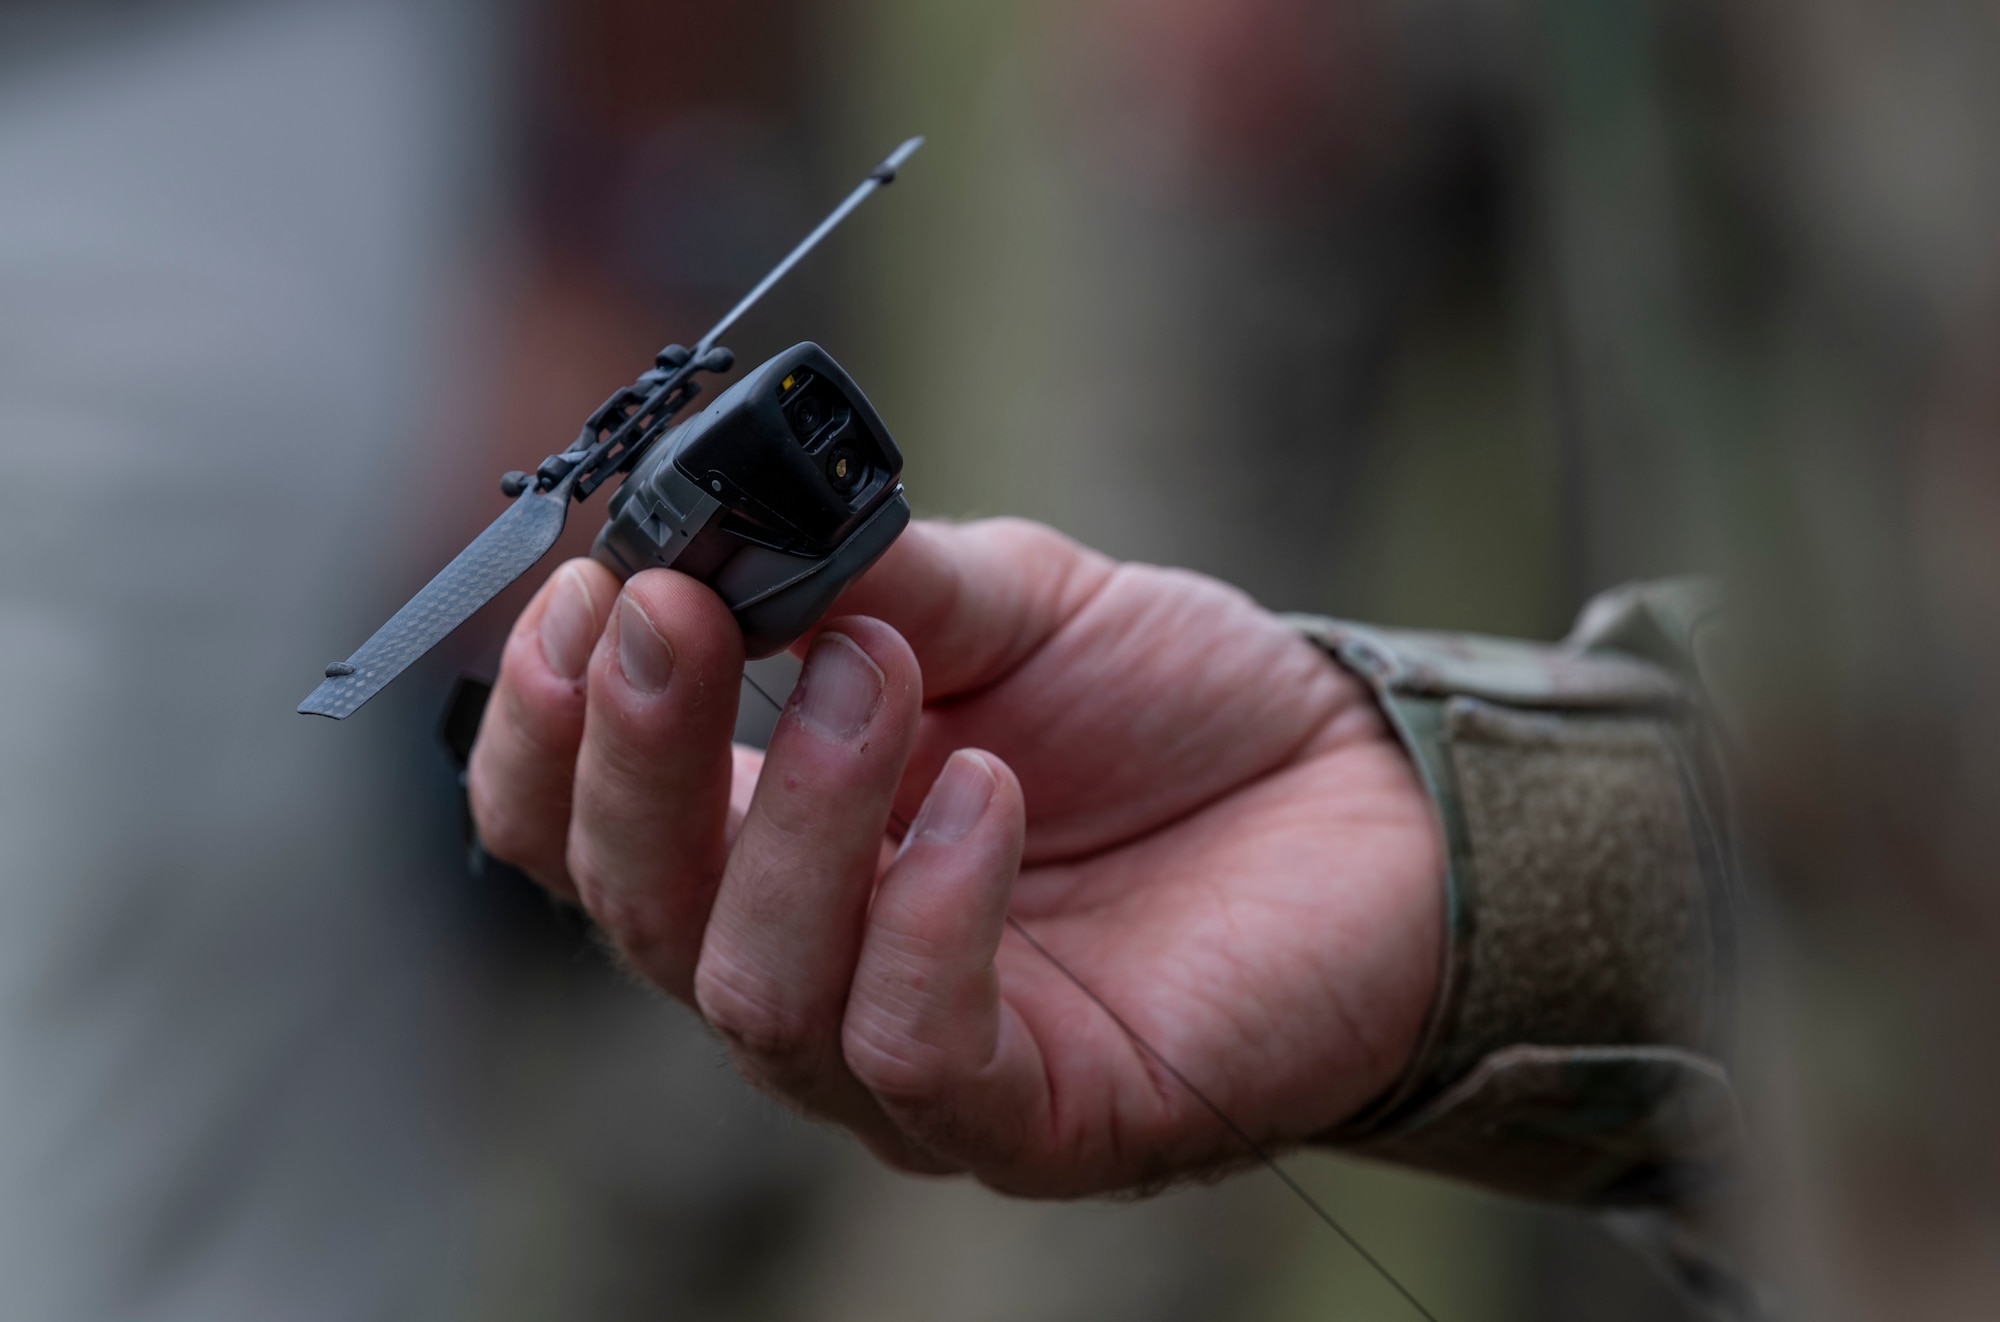 A black hornet nano unmanned aerial vehicle is displayed during the Air Force Special Operations Command Technology, Acquisition, and Sustainment Review at Austere Field #6, Florida, July 21, 2021.